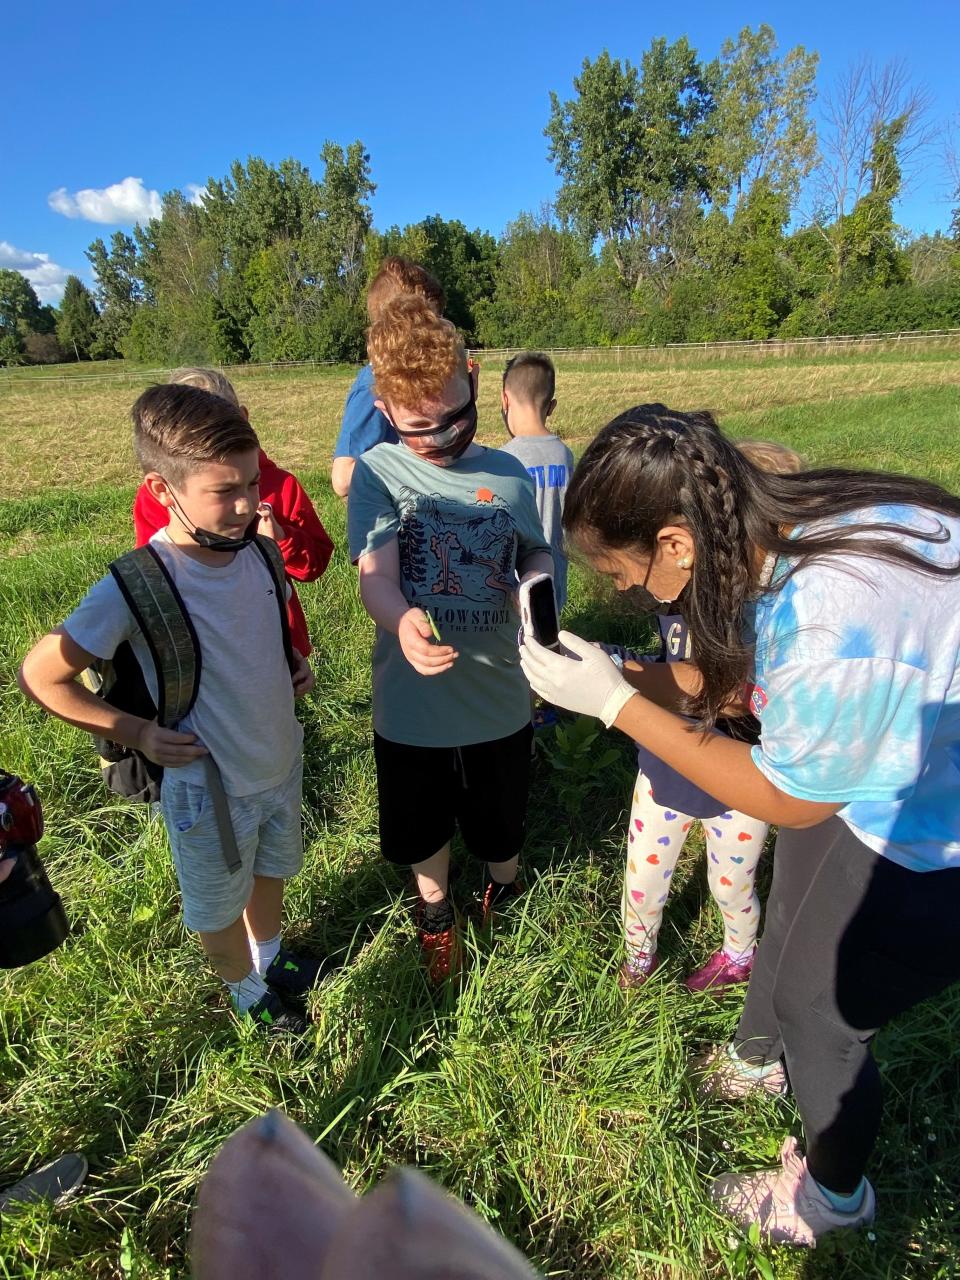 The Thistle and Shamrock 4-H Clubs participate in outdoor education activities.